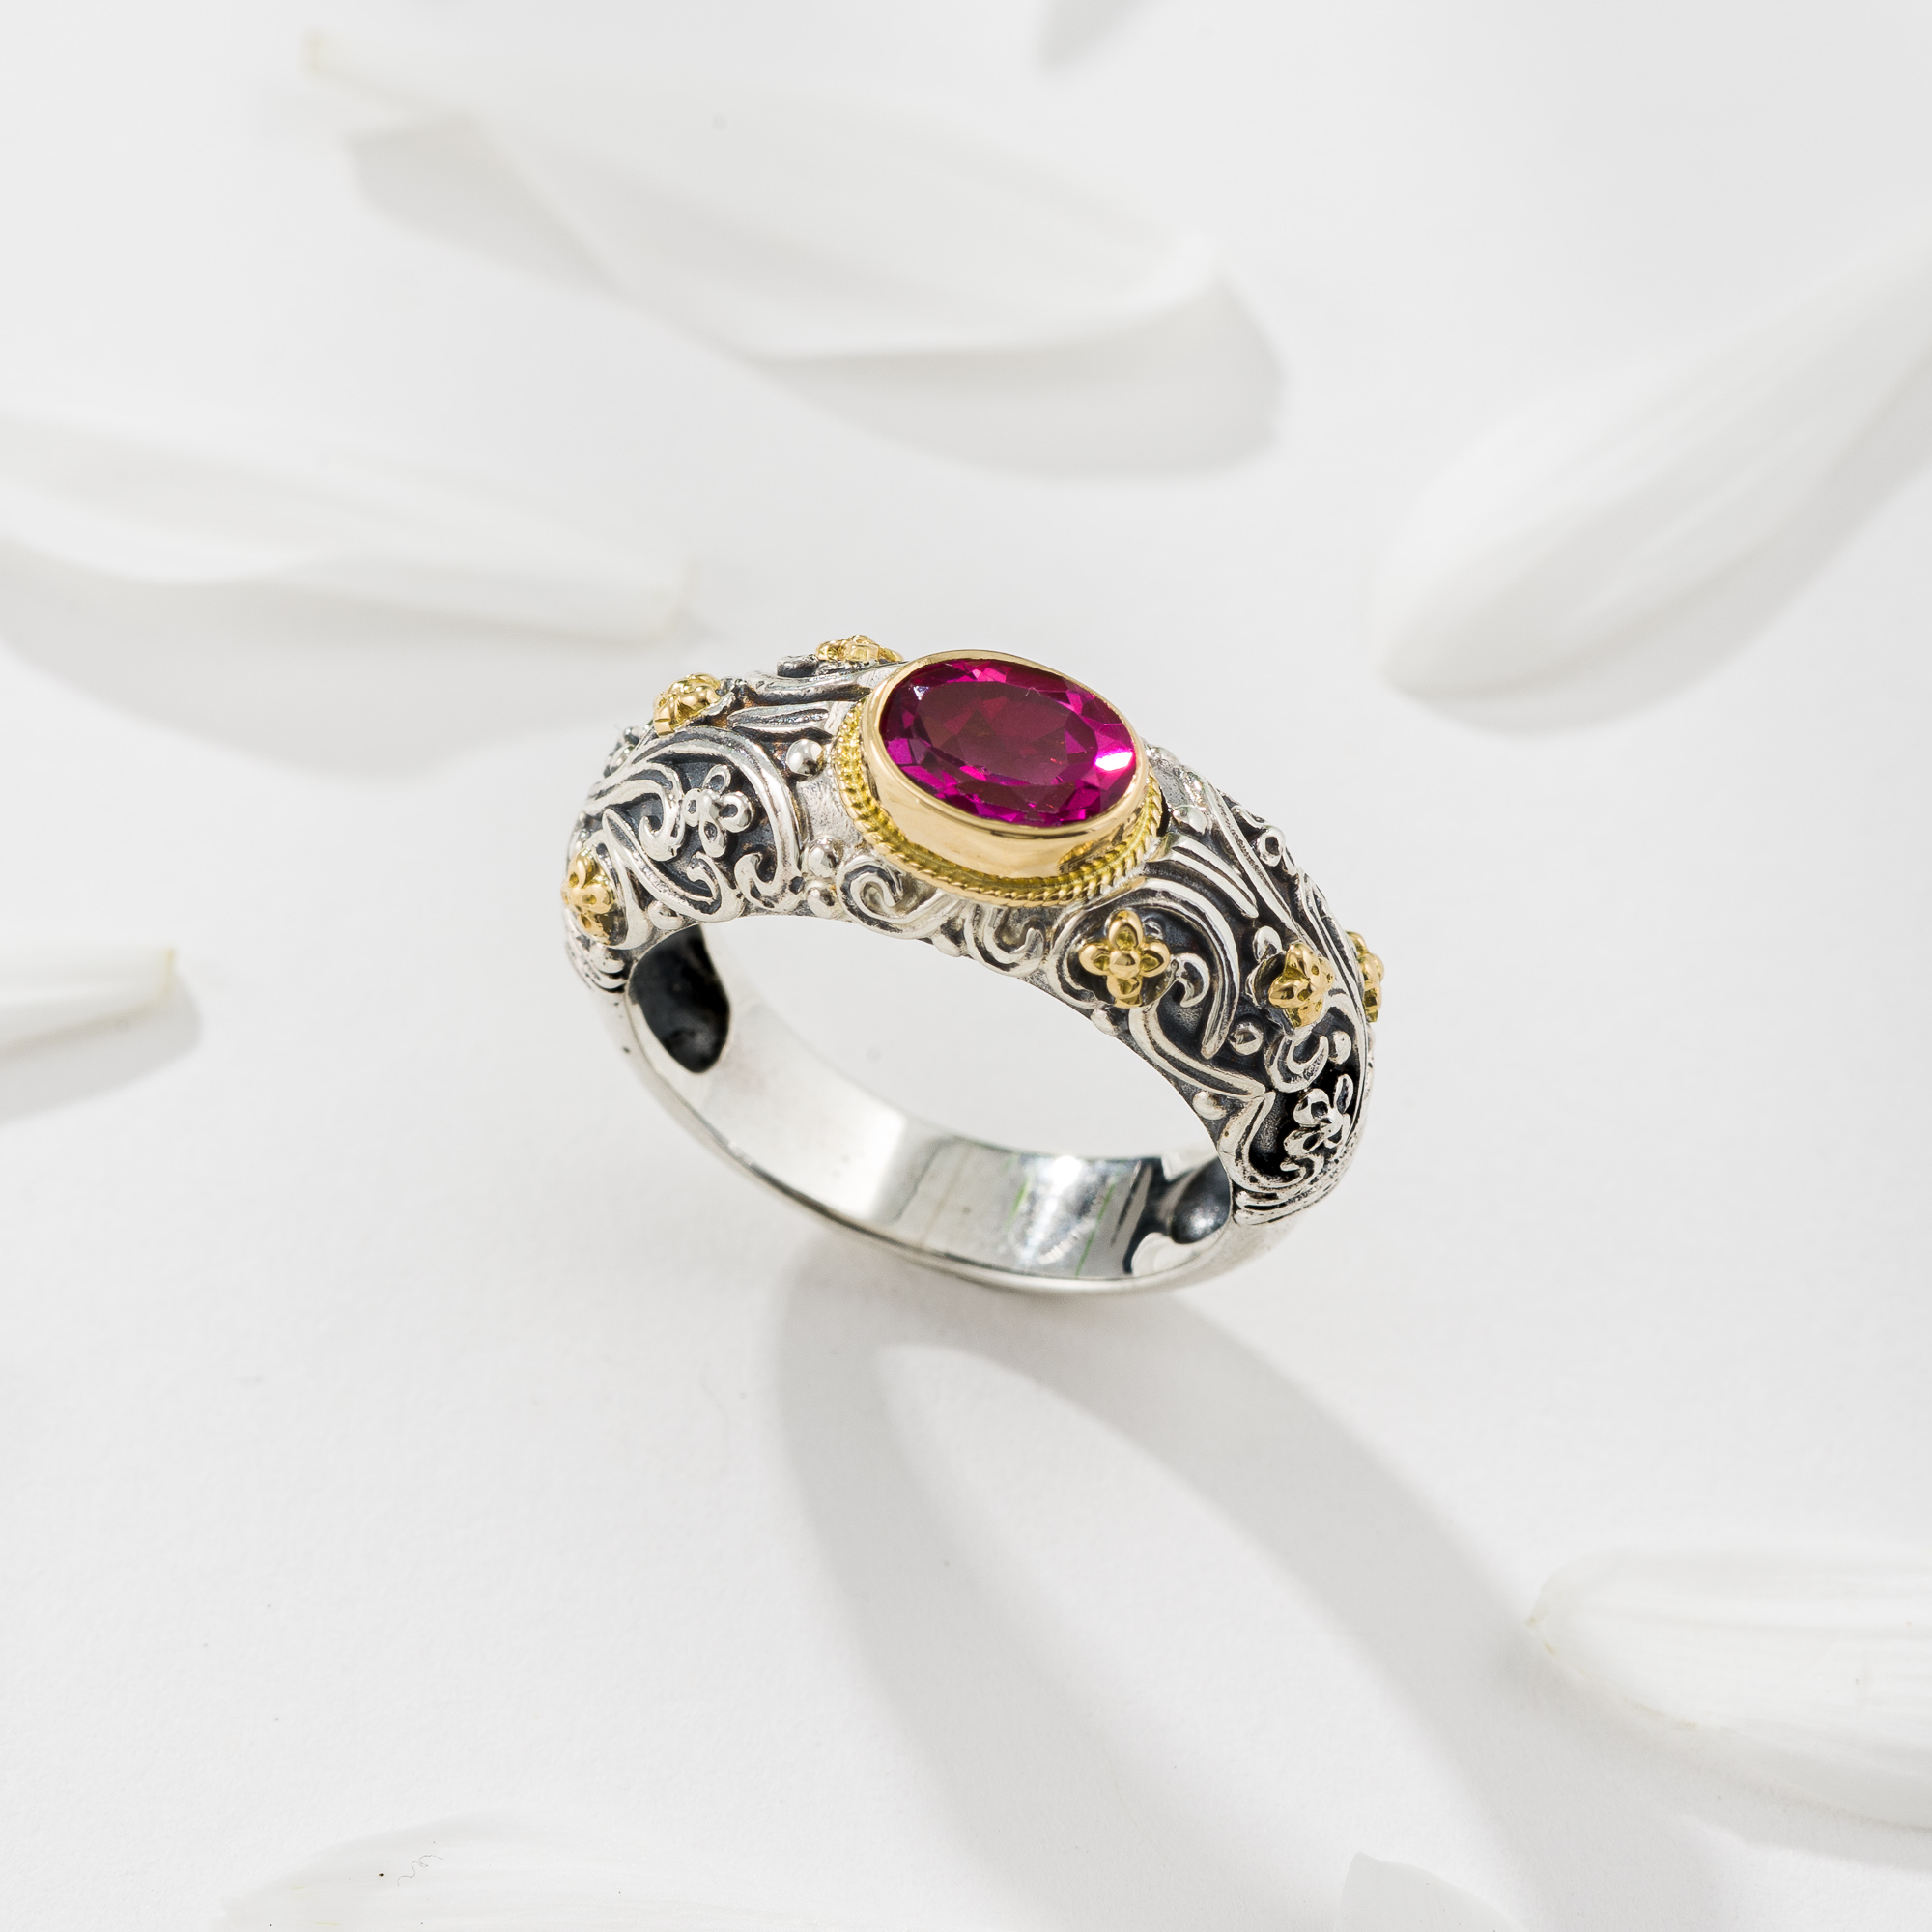 Eve Eden's Garden ring in 18K Gold and Sterling Silver with pink topaz